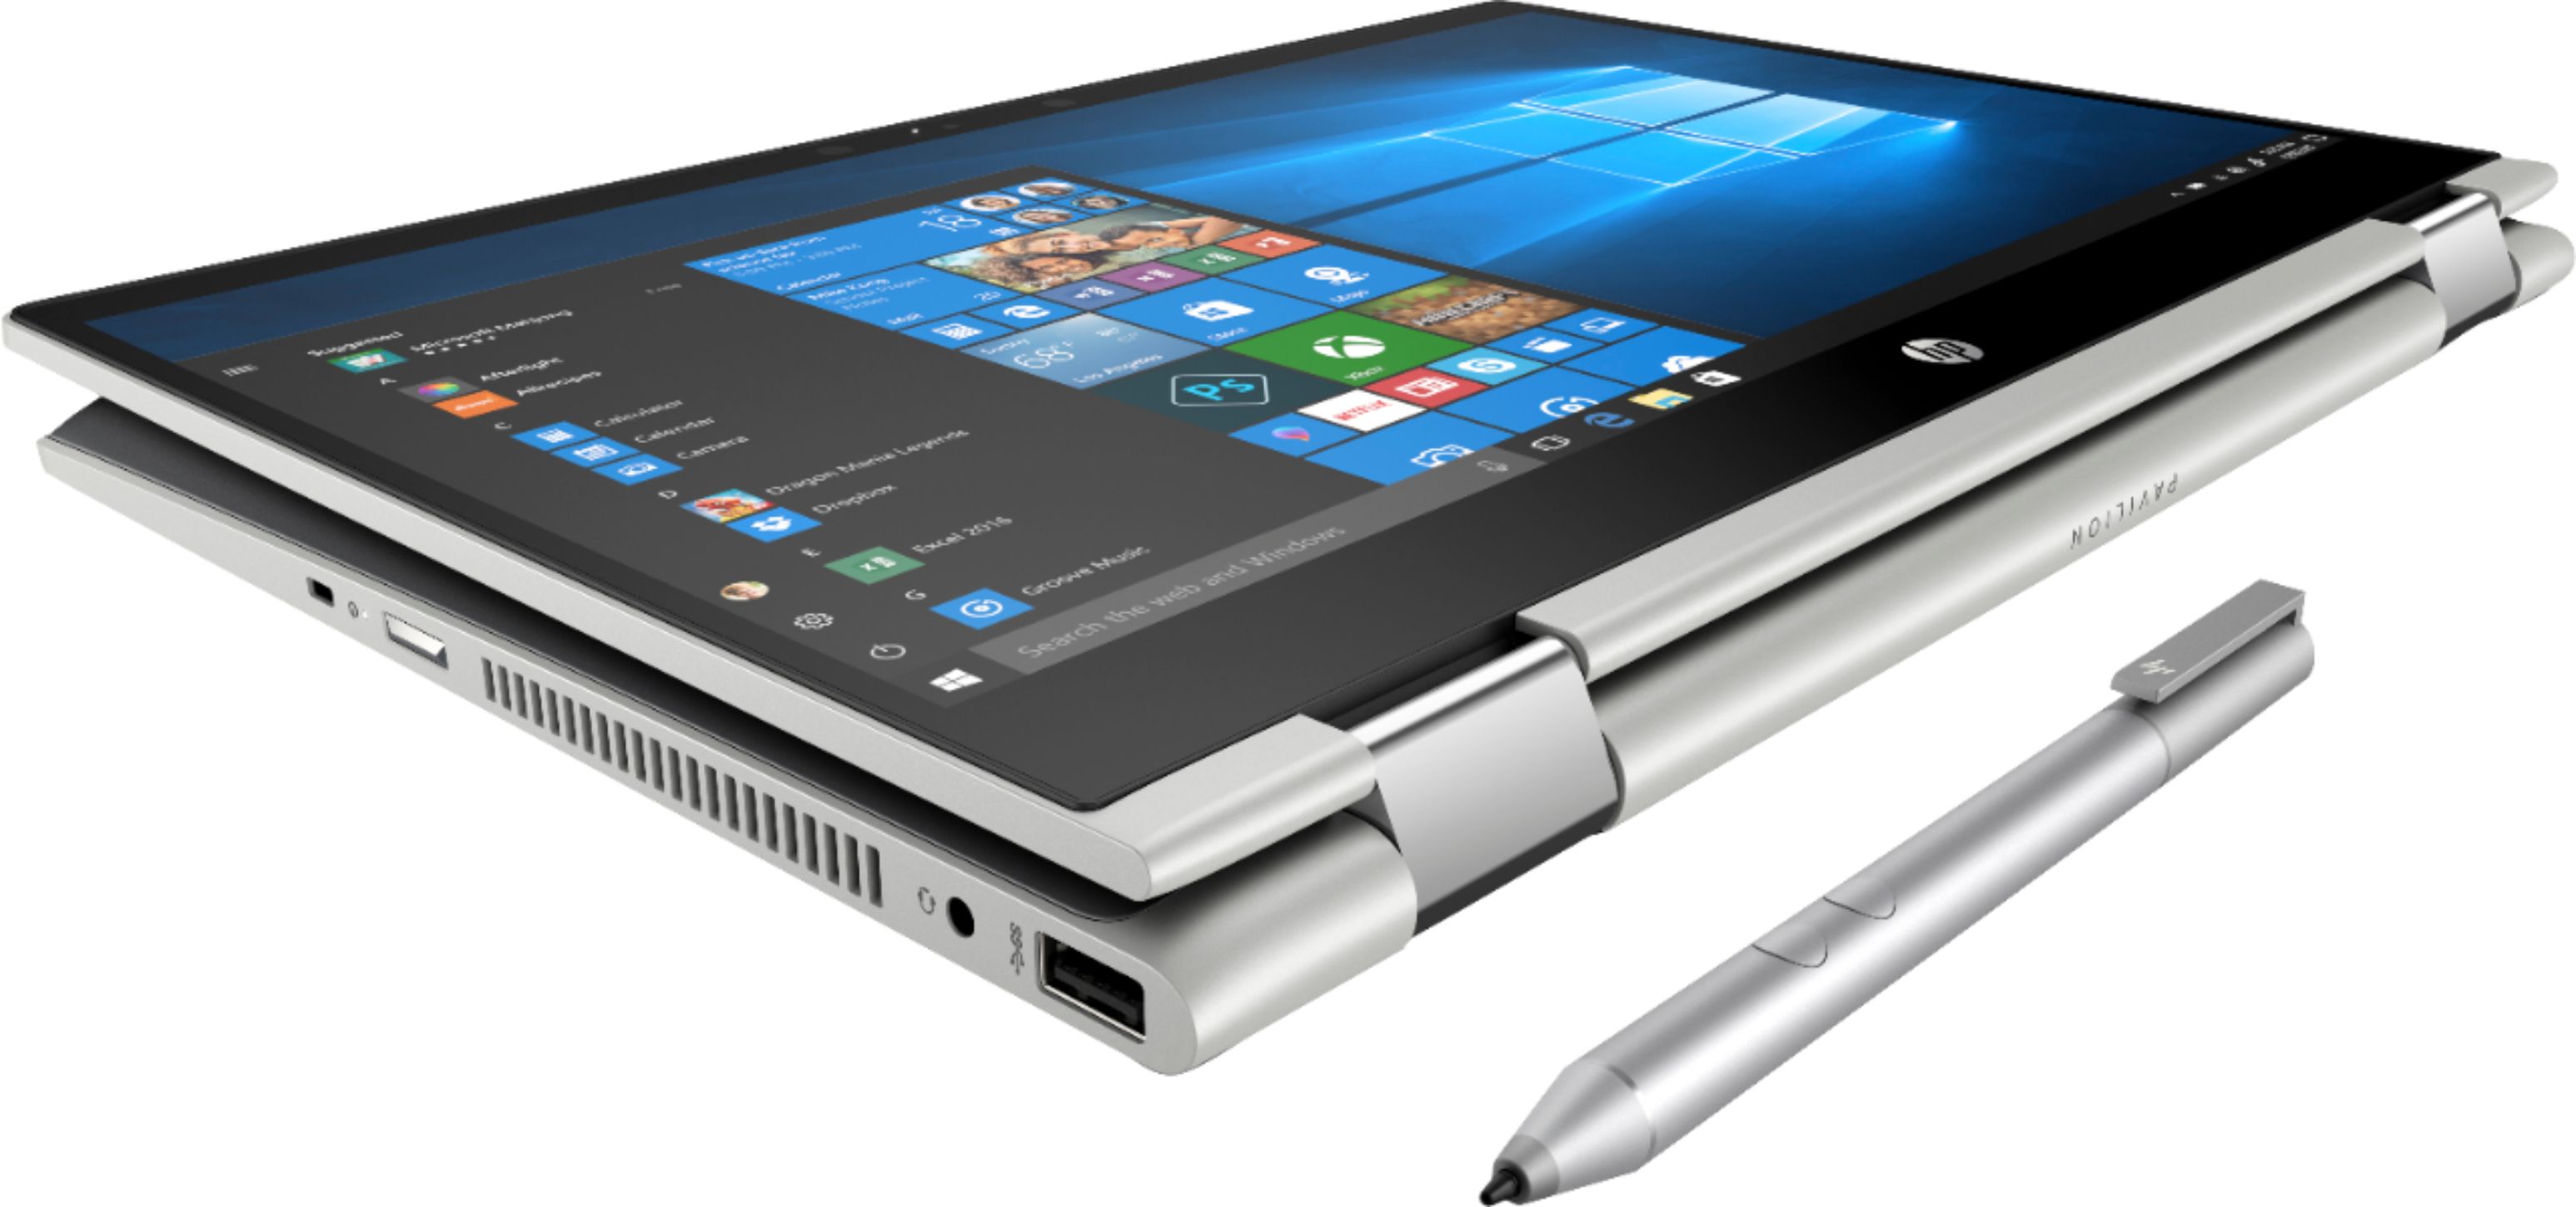 Customer Reviews Hp Pavilion X360 2 In 1 14 Touch Screen Laptop Intel